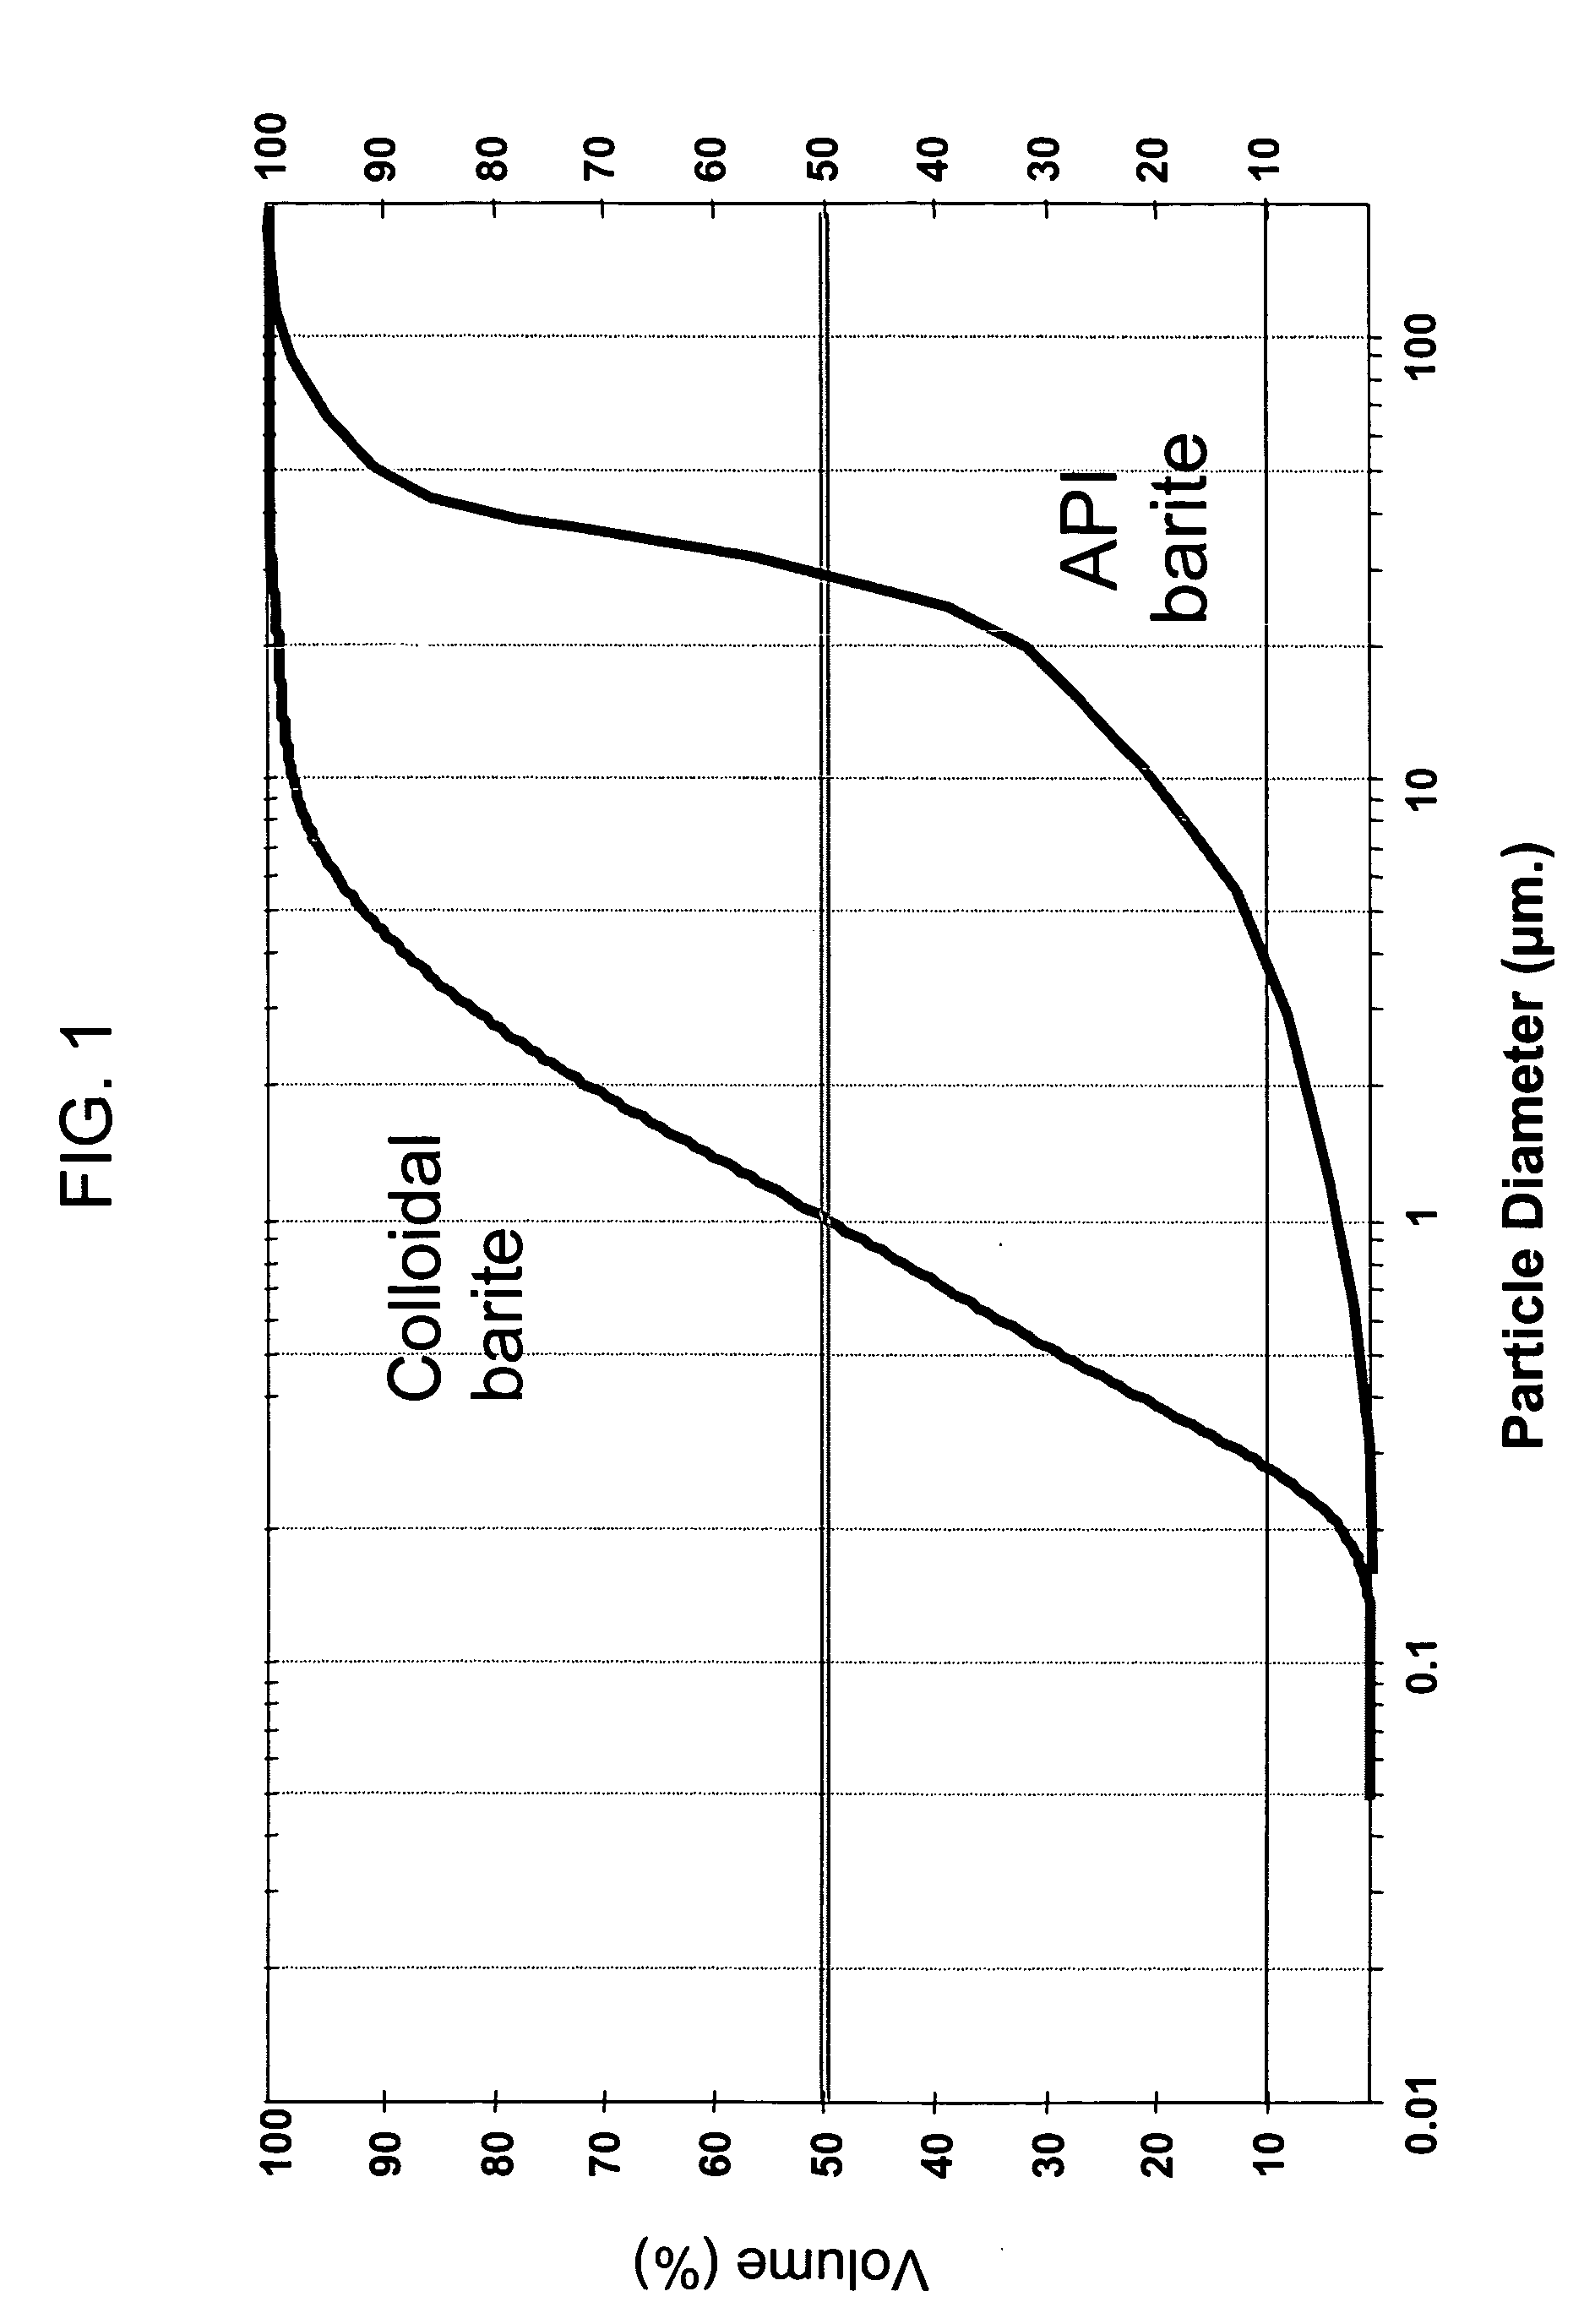 Additive for increasing the density of a fluid for casing annulus pressure control